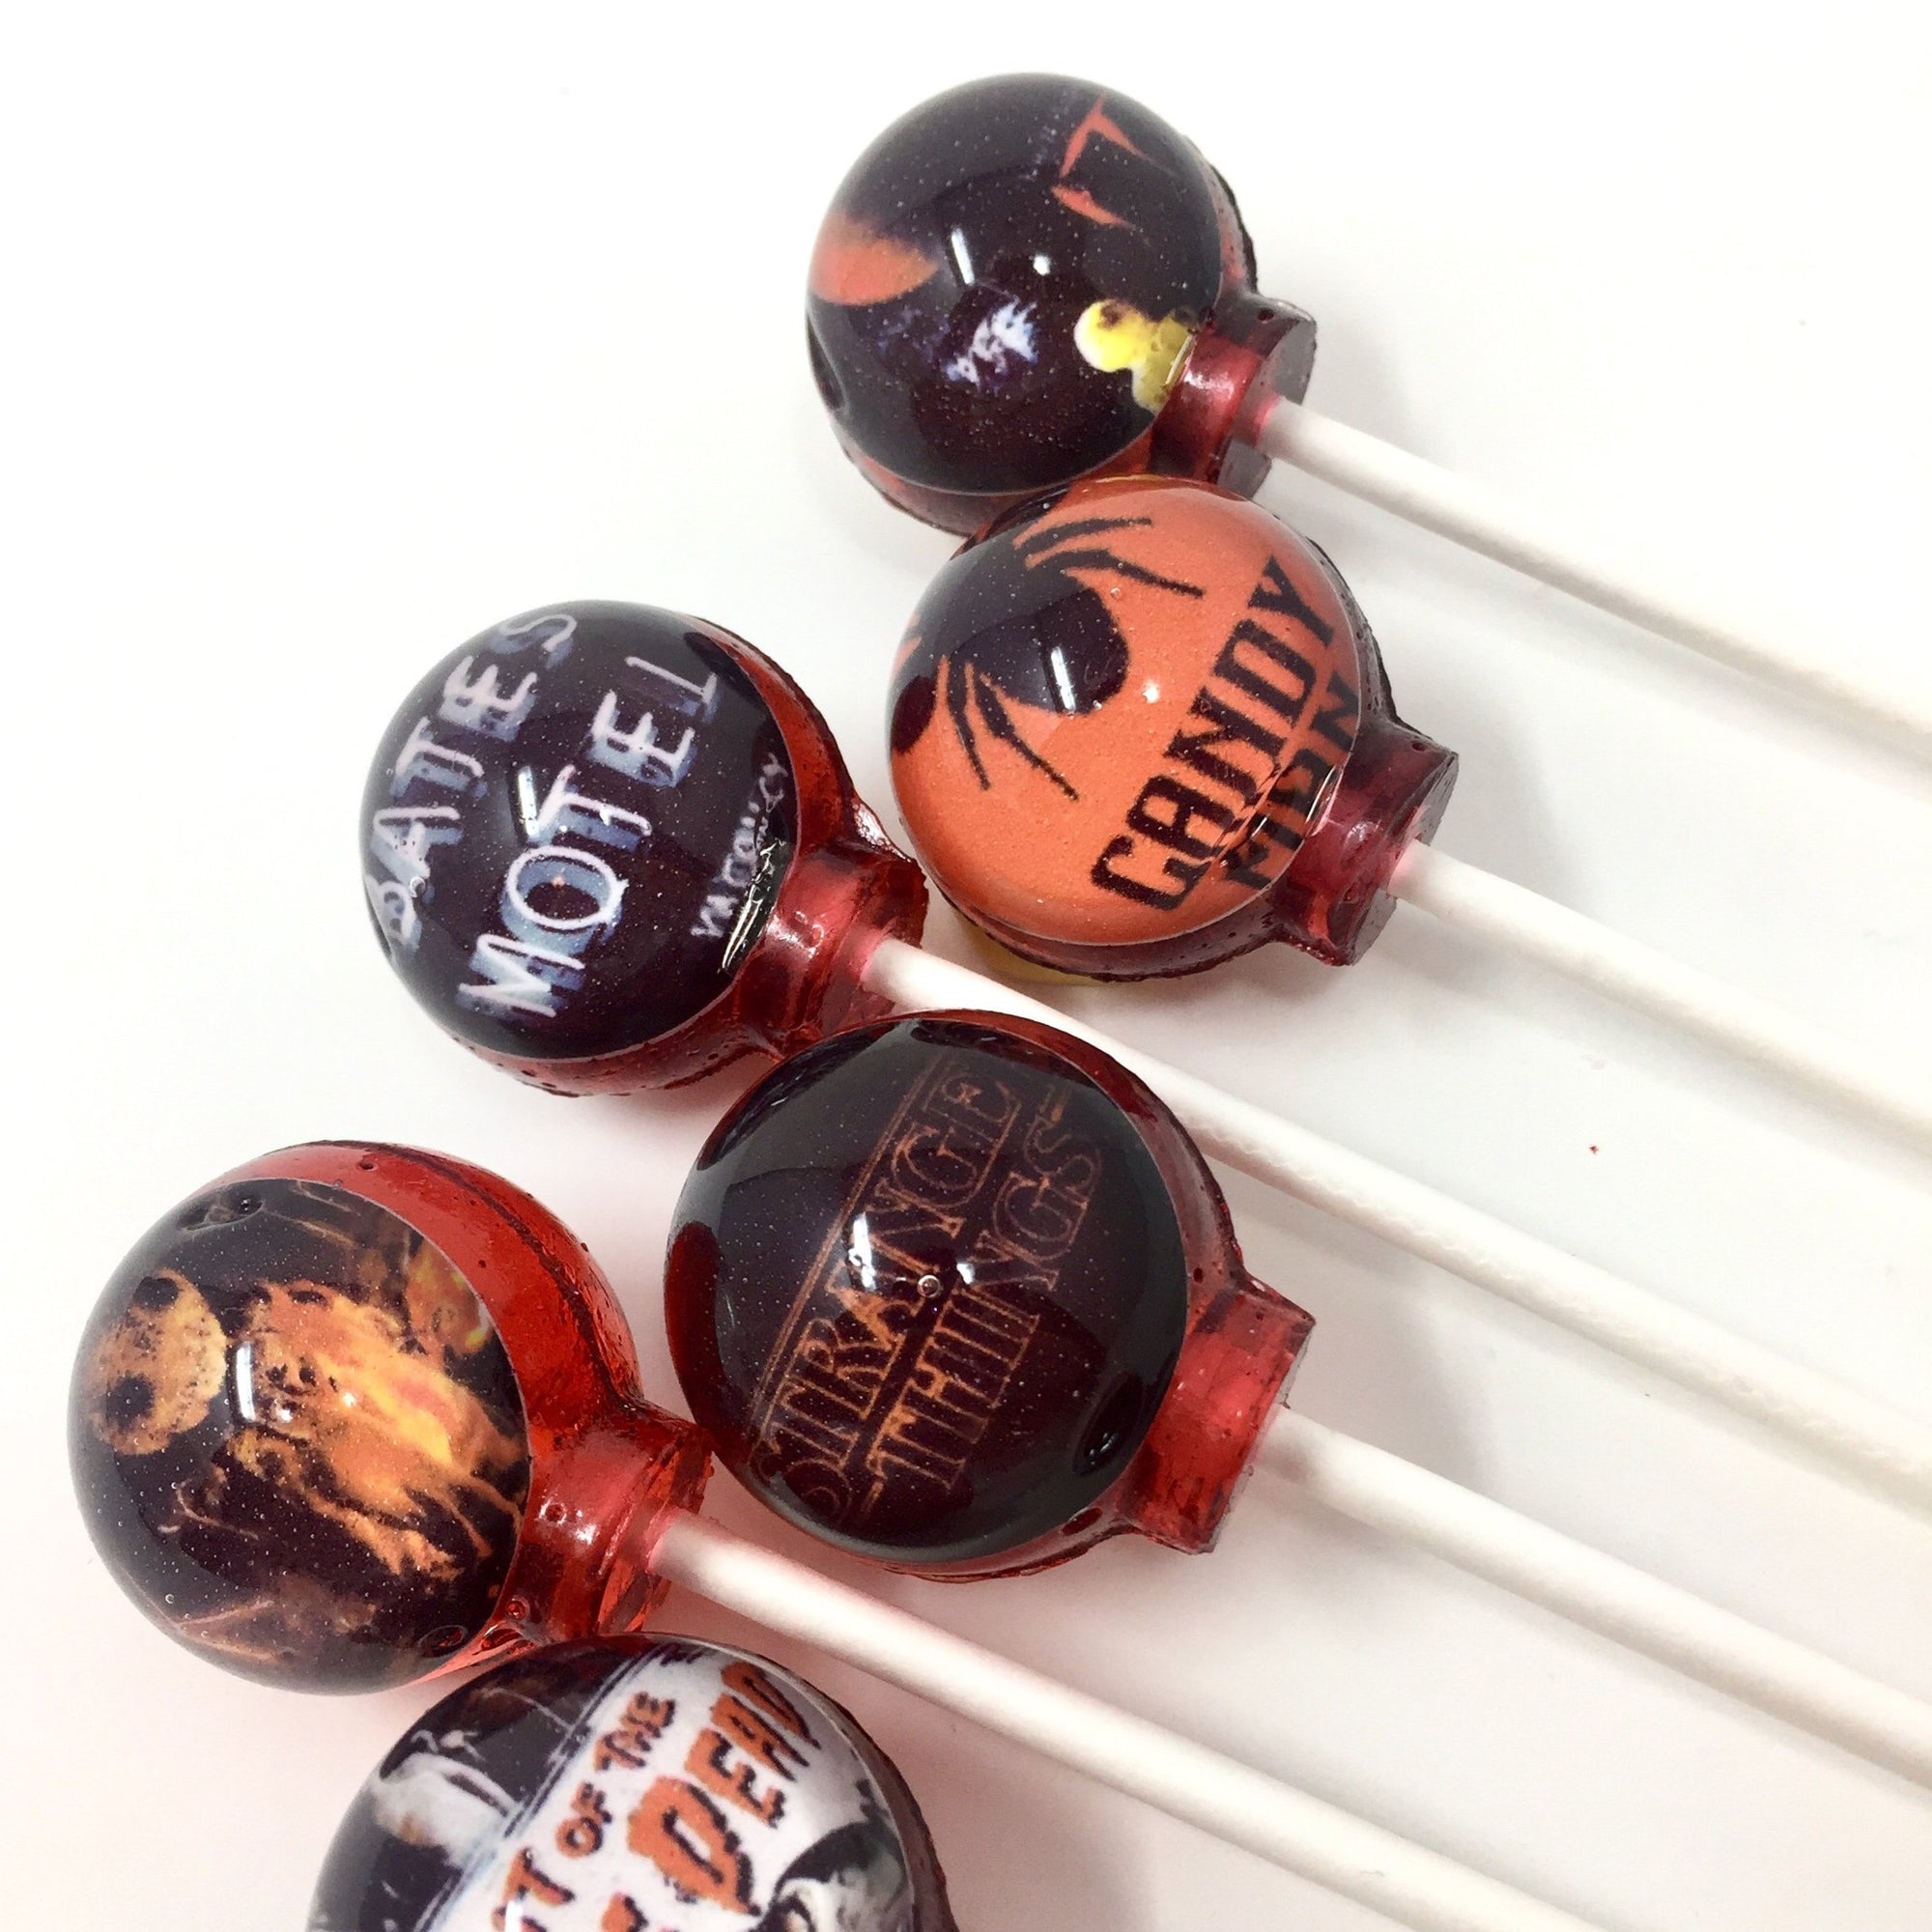 Scary Movie Poster Lollipops 6-piece set by I Want Candy!